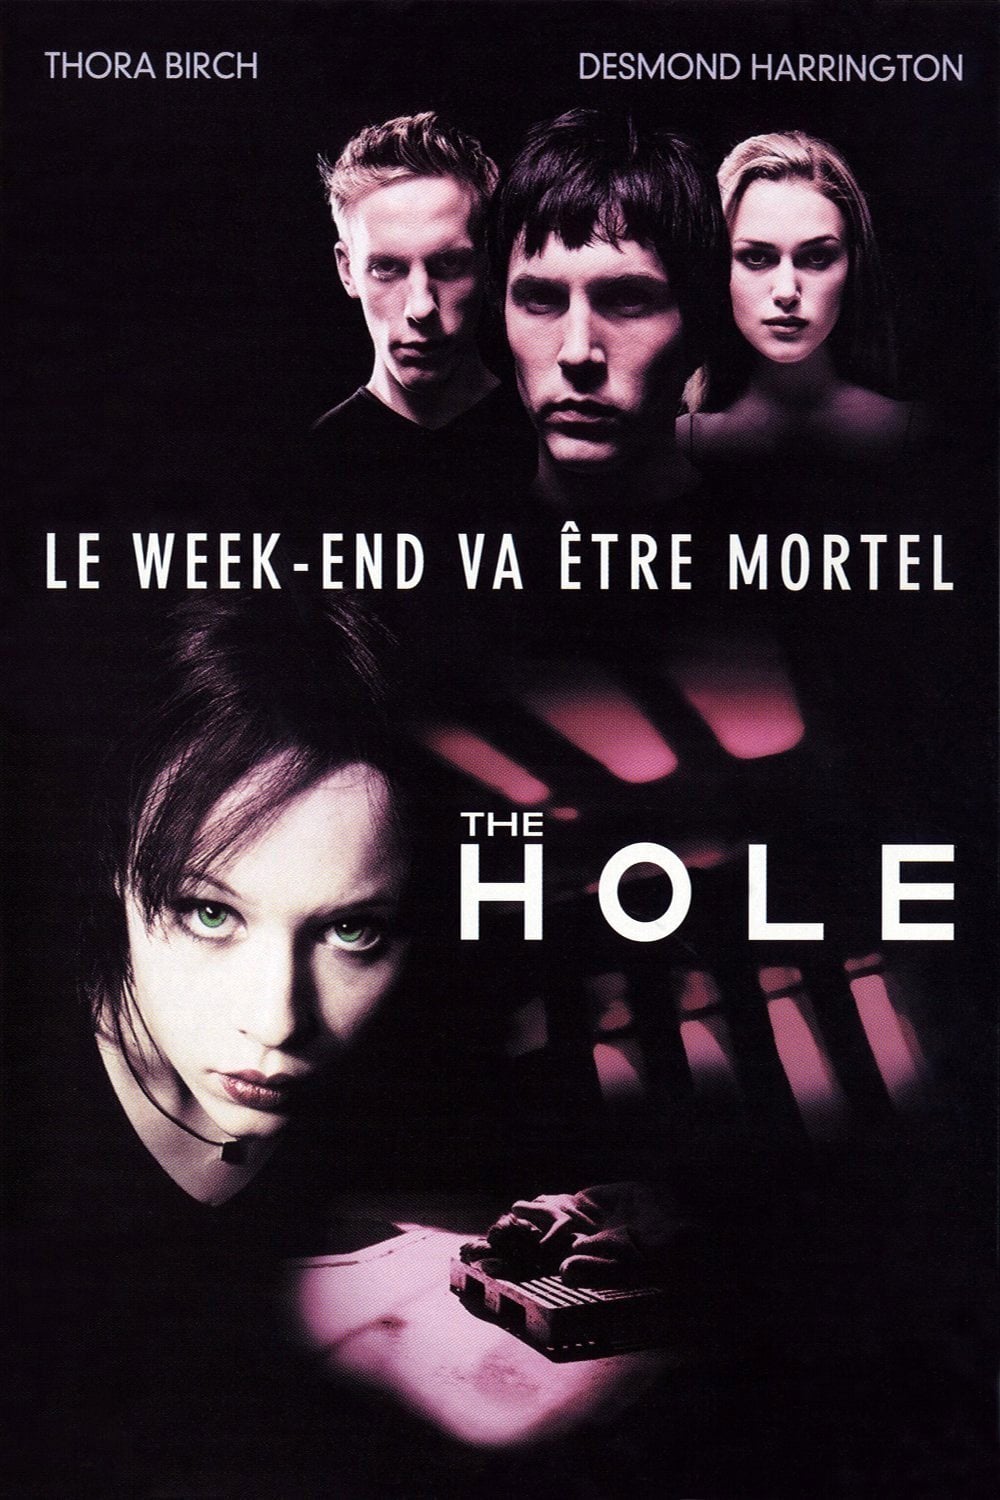 The Hole streaming